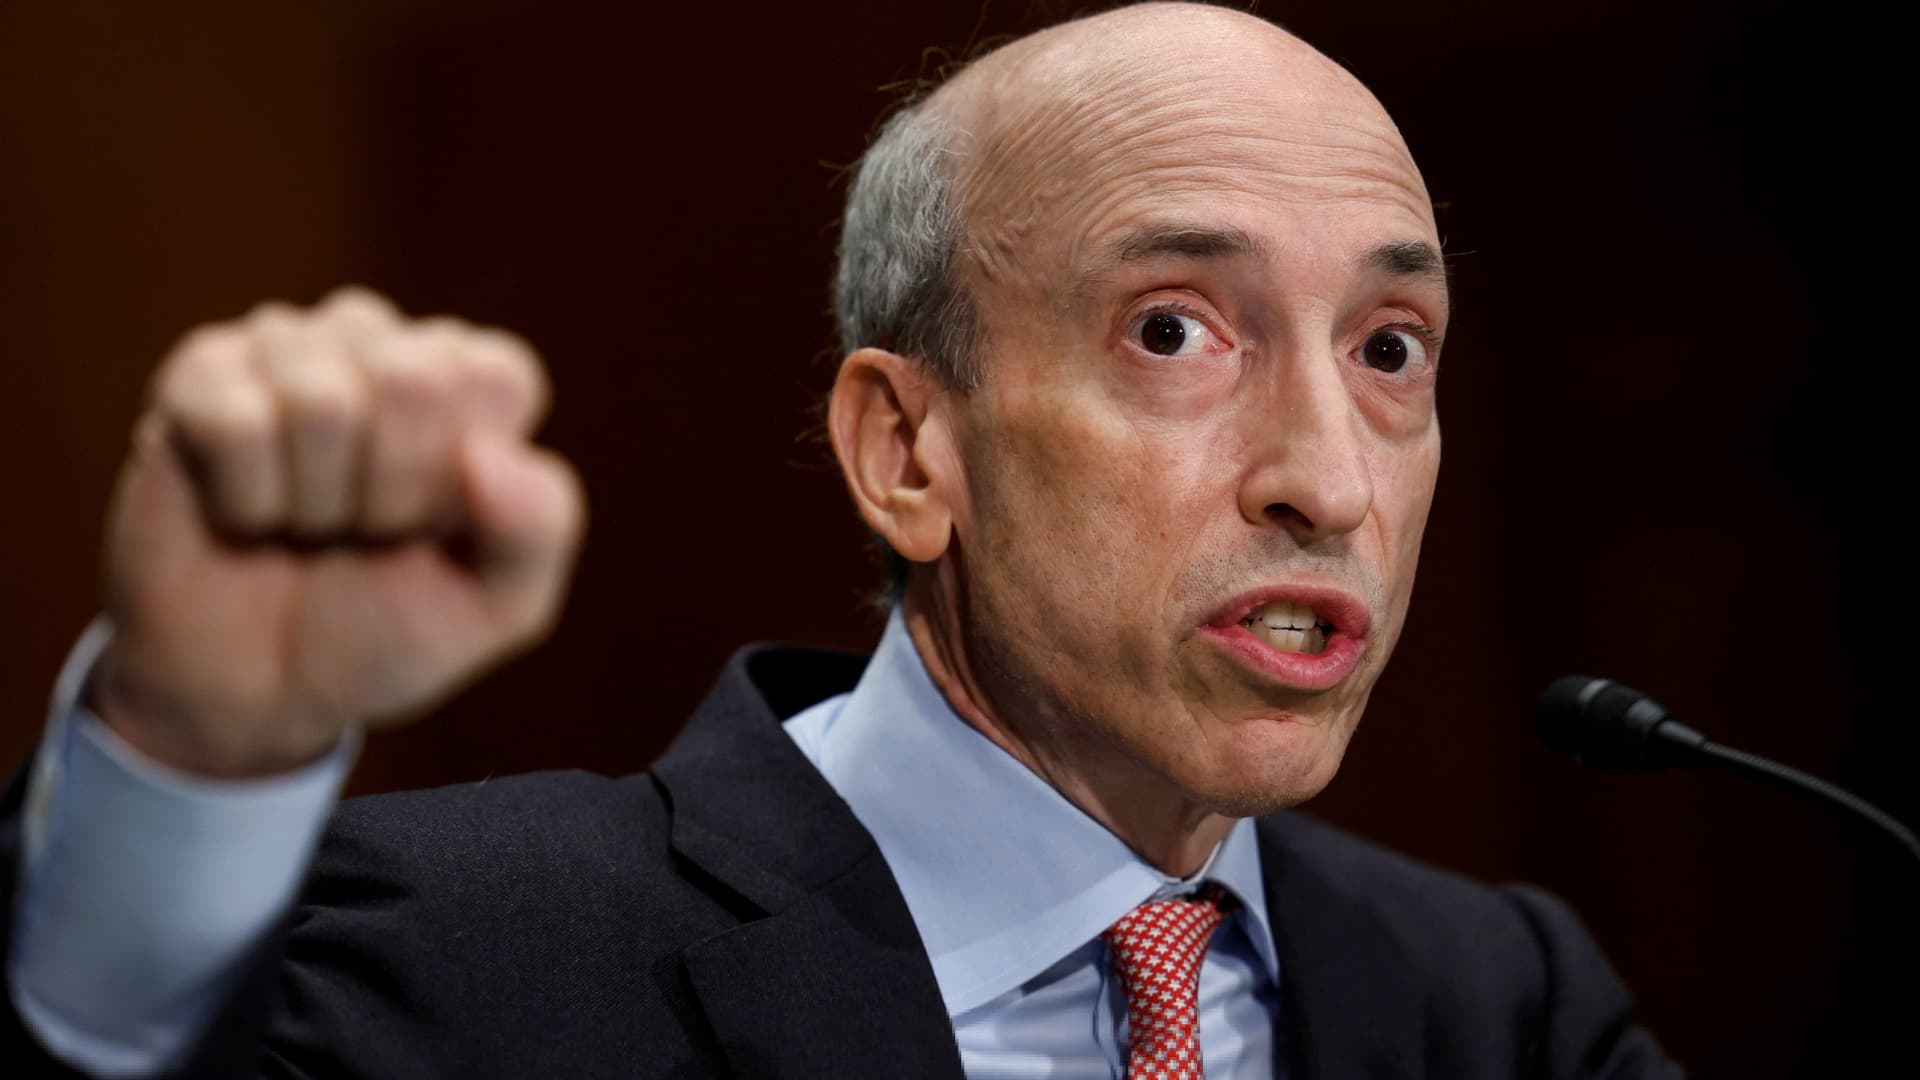 SEC Chair Gensler says crypto frenzy is rife with 'hucksters, fraudsters, scam artists'